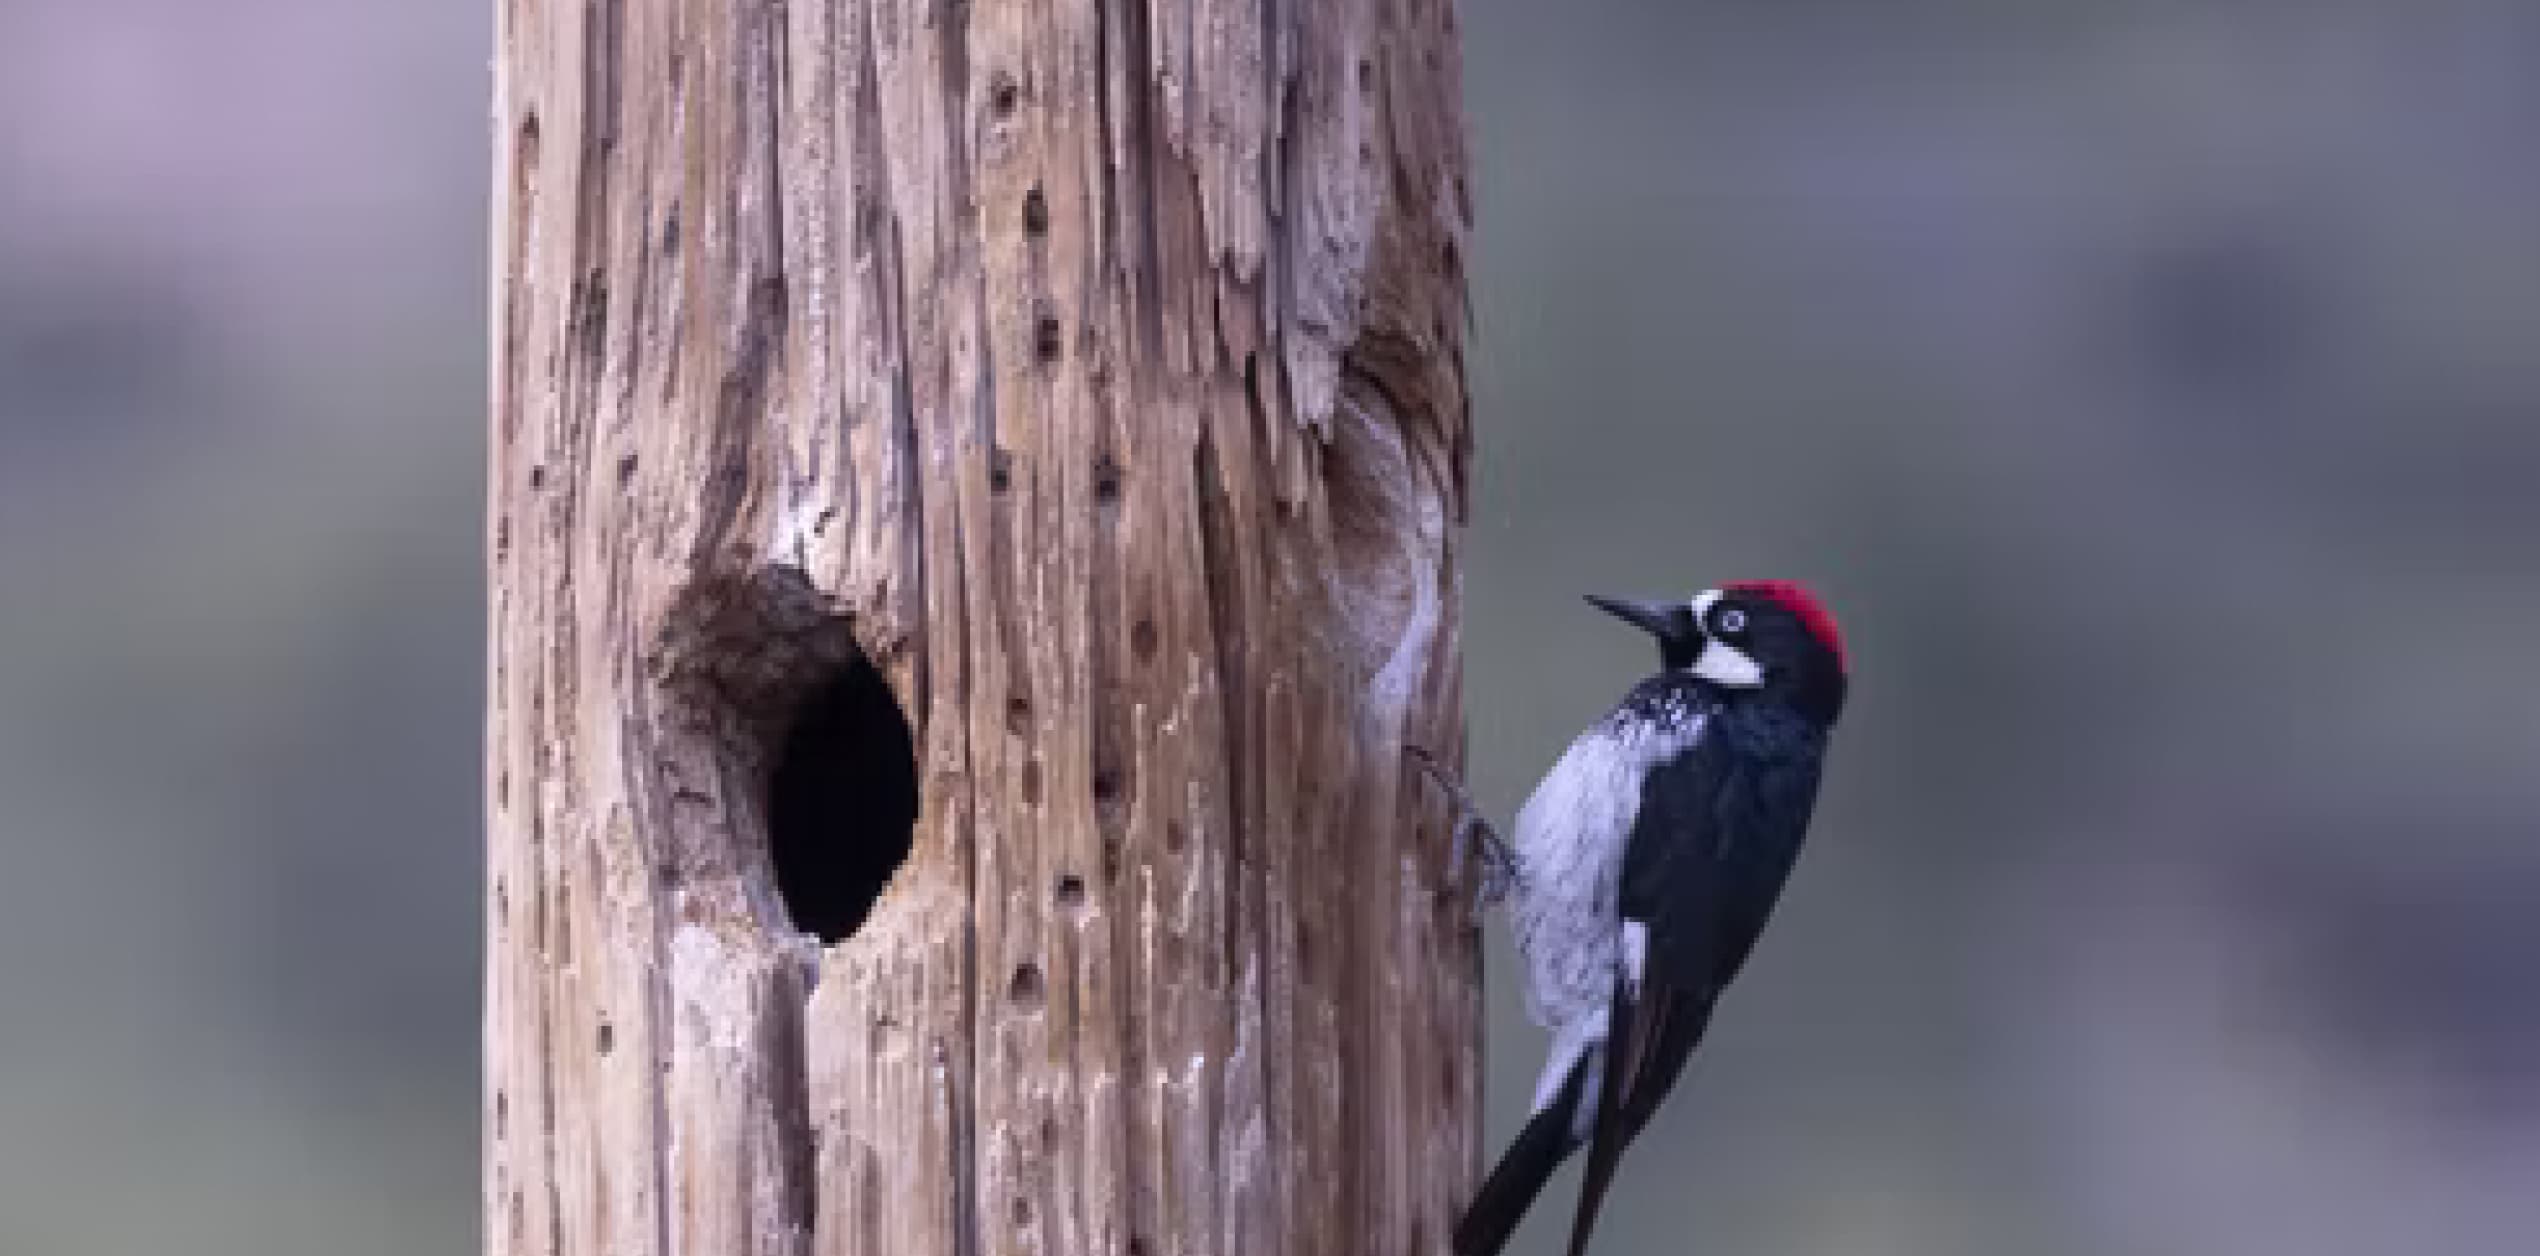 Why do woodpeckers peck wood